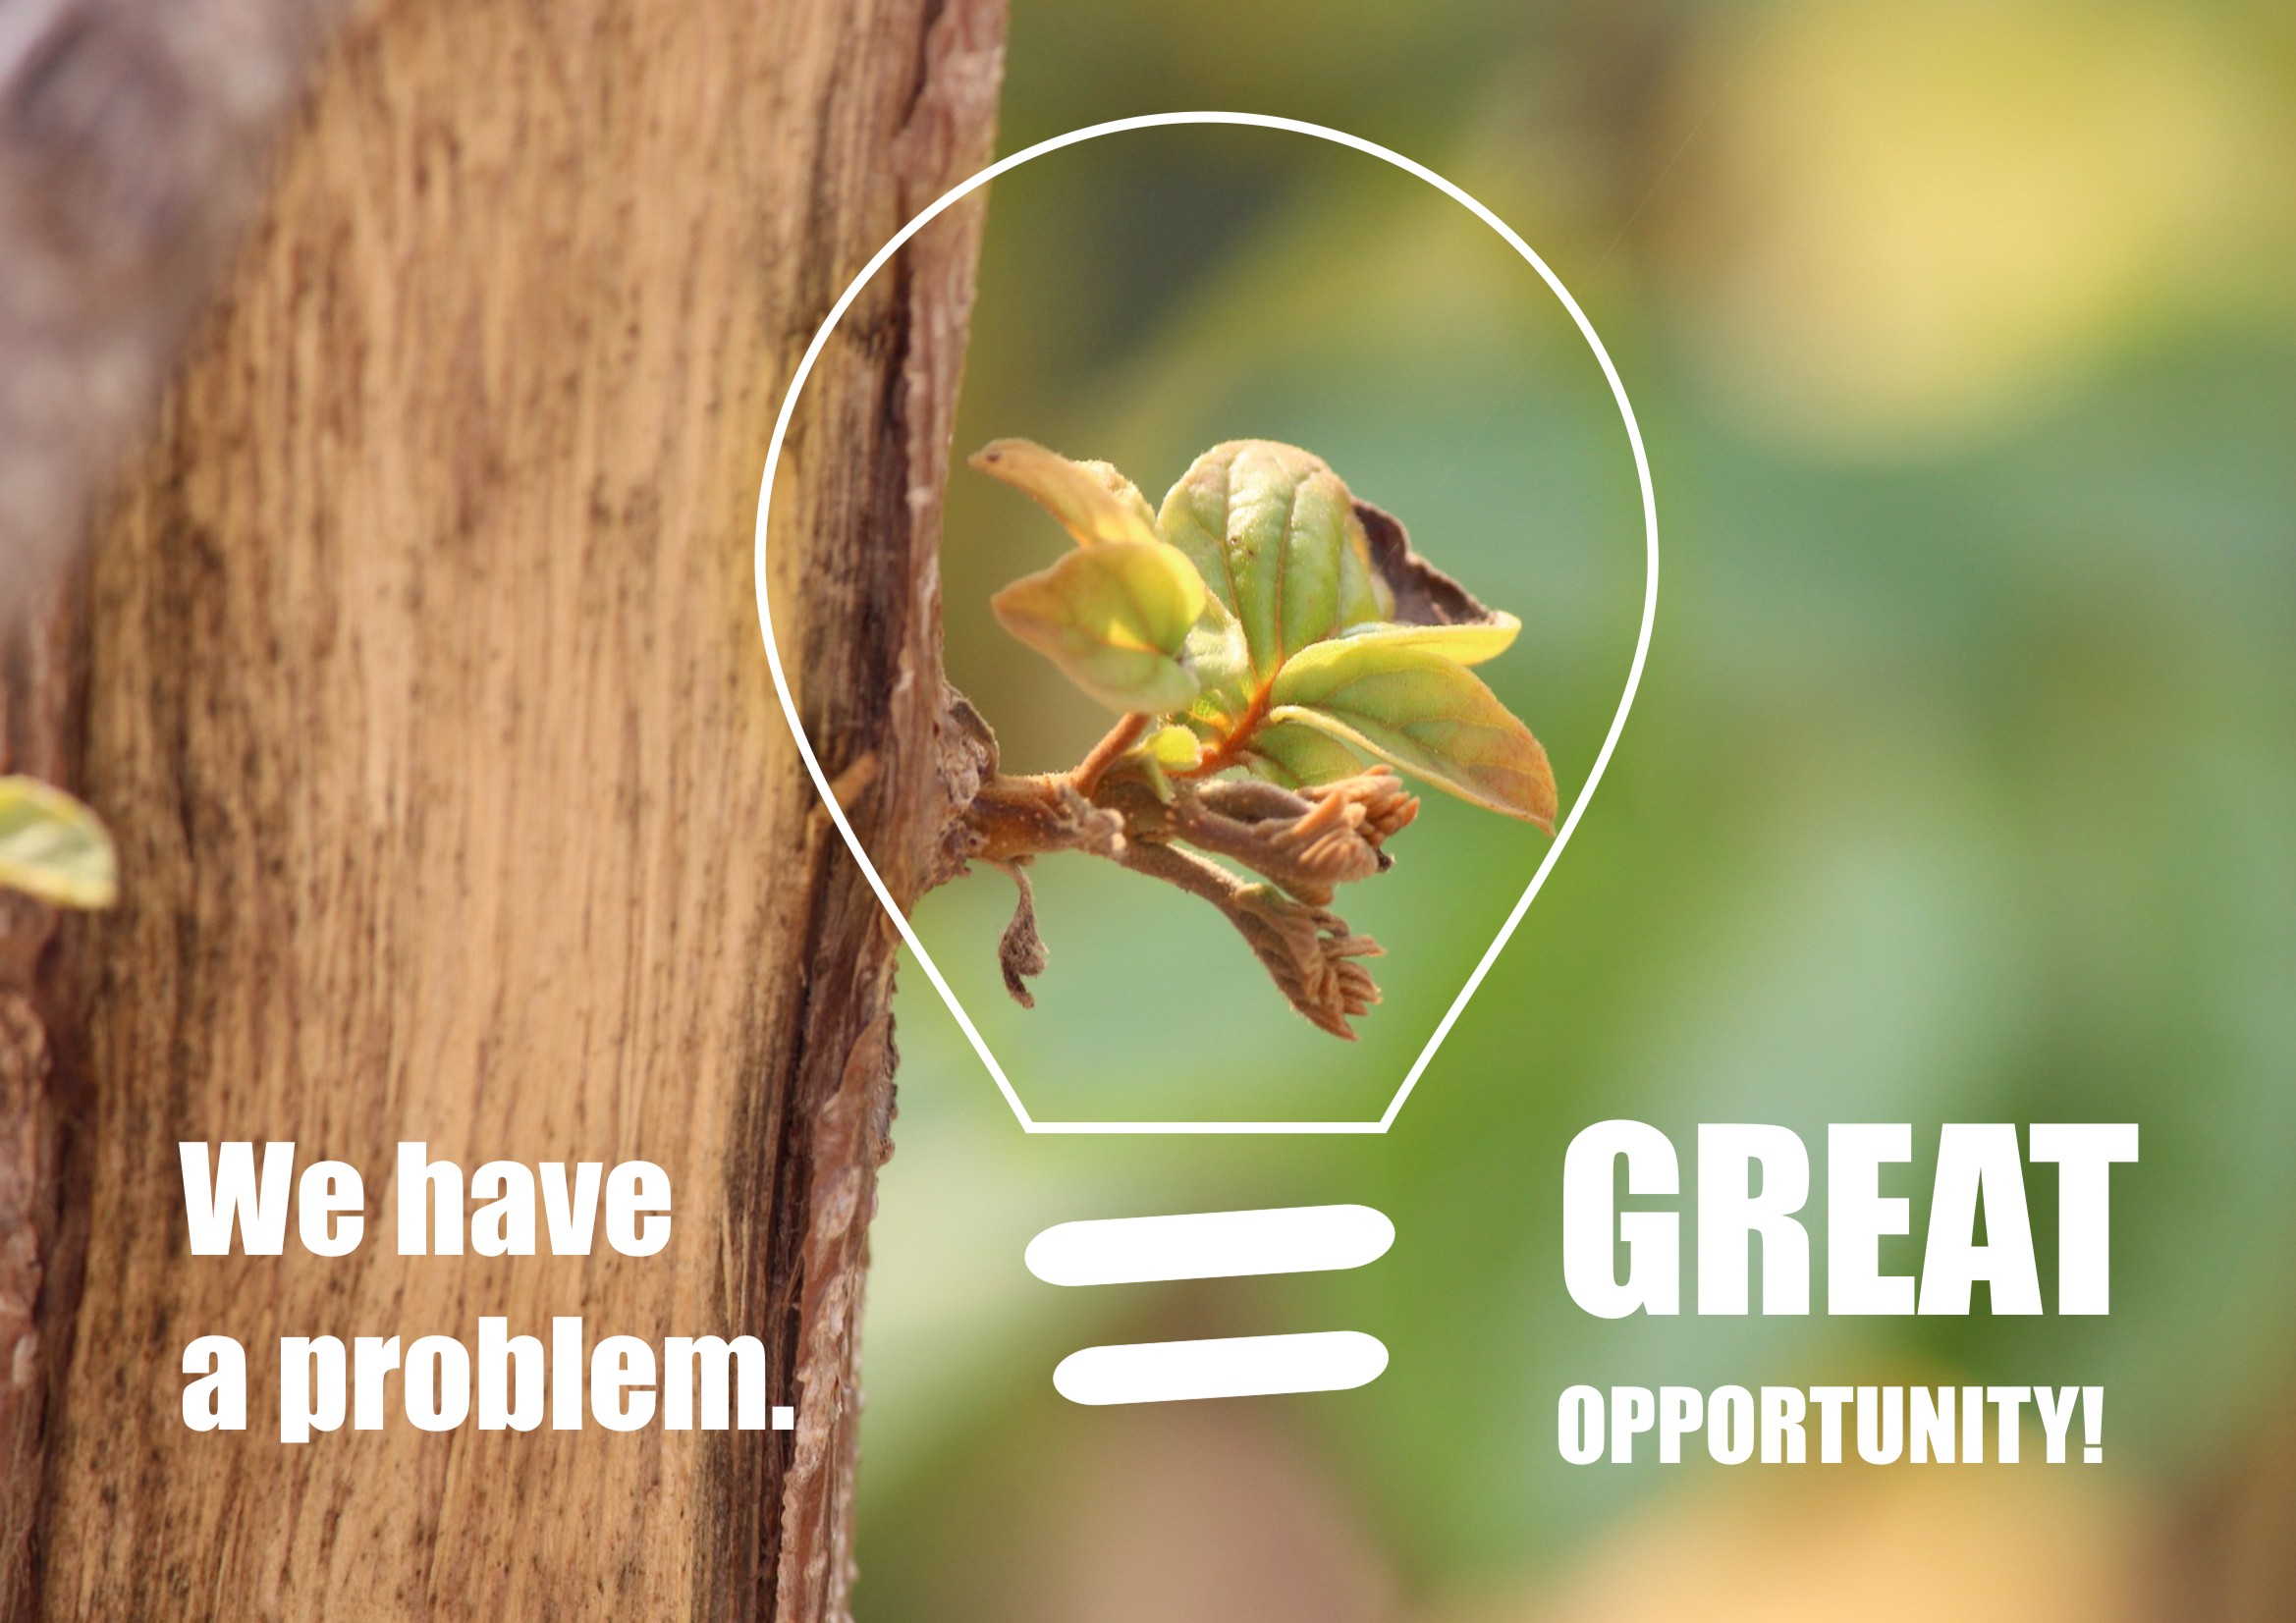 Have a problem = Great opportunity